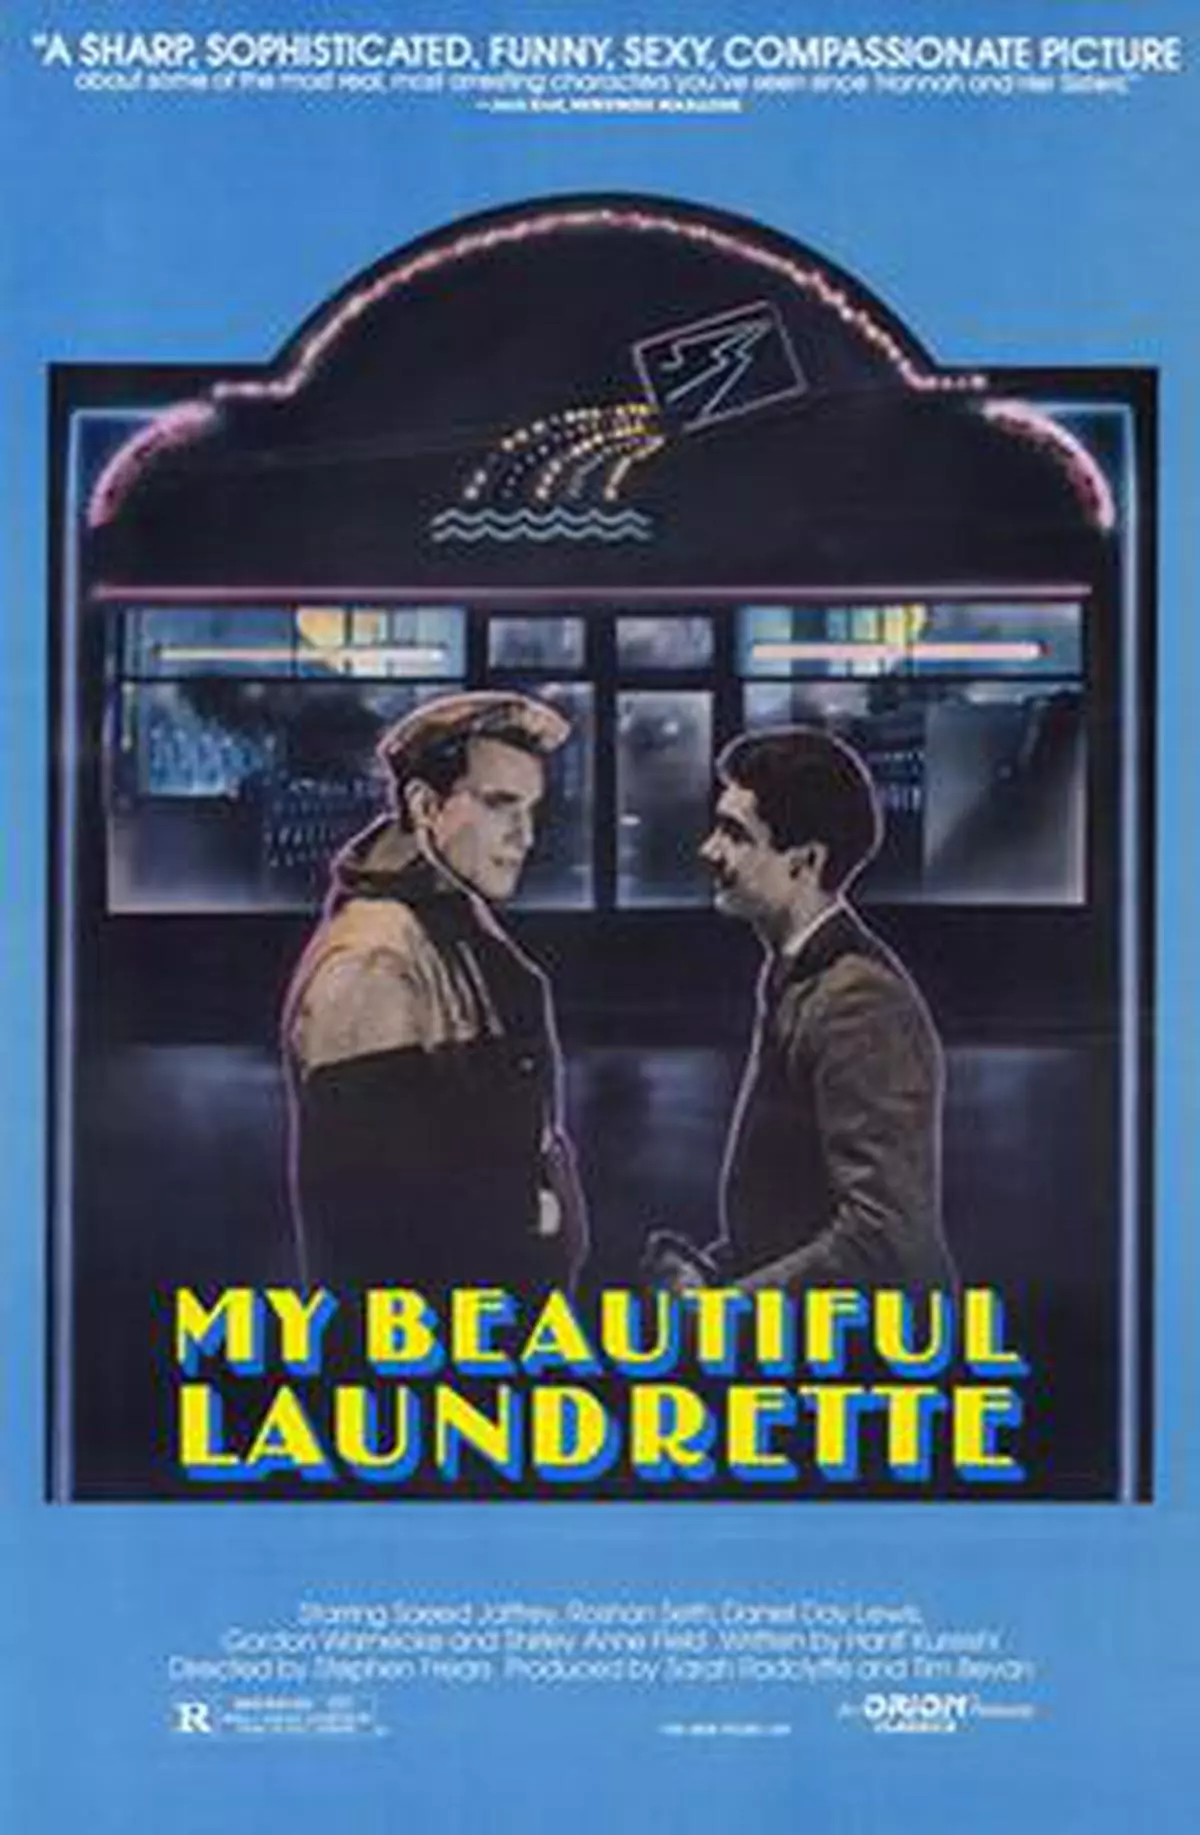 The Saeed Jaffrey starrer, ‘My Beautiful Laundrette’, a British film on a gay relationship, was screened in 1986 at a theatre in what was then Madras, pointing to slightly more liberal attitudes.